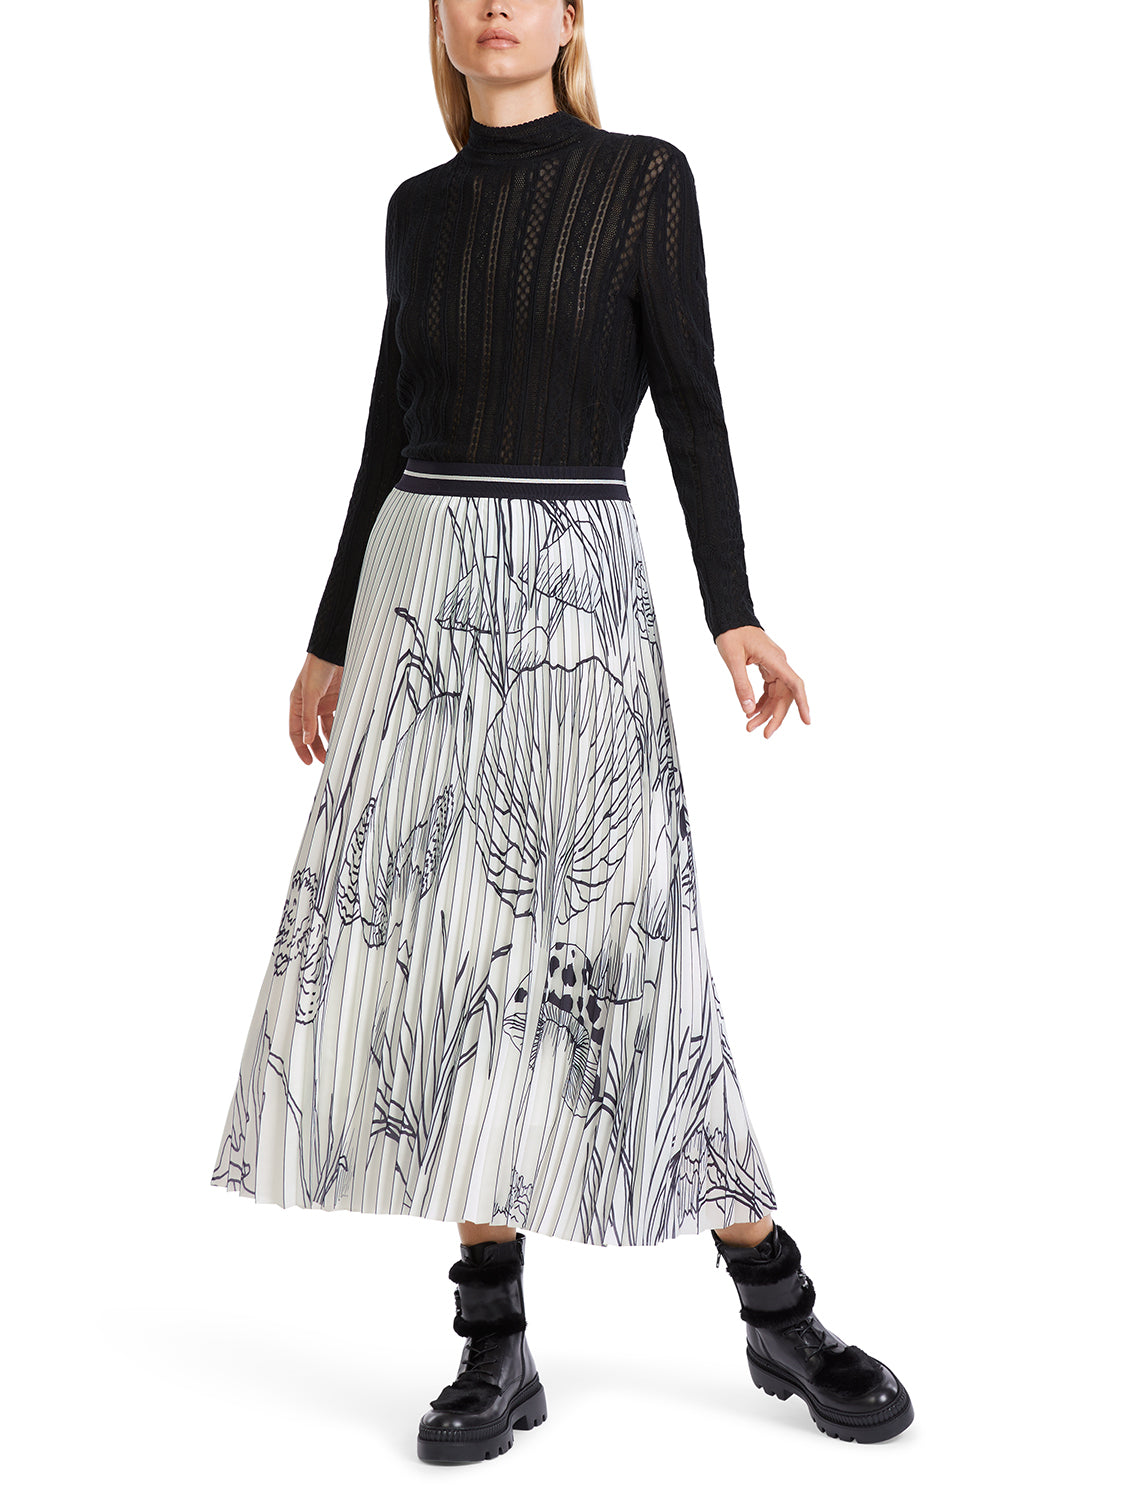 MarcCain Pleated "Rethink Together" Print Skirt VC 71.20 W76